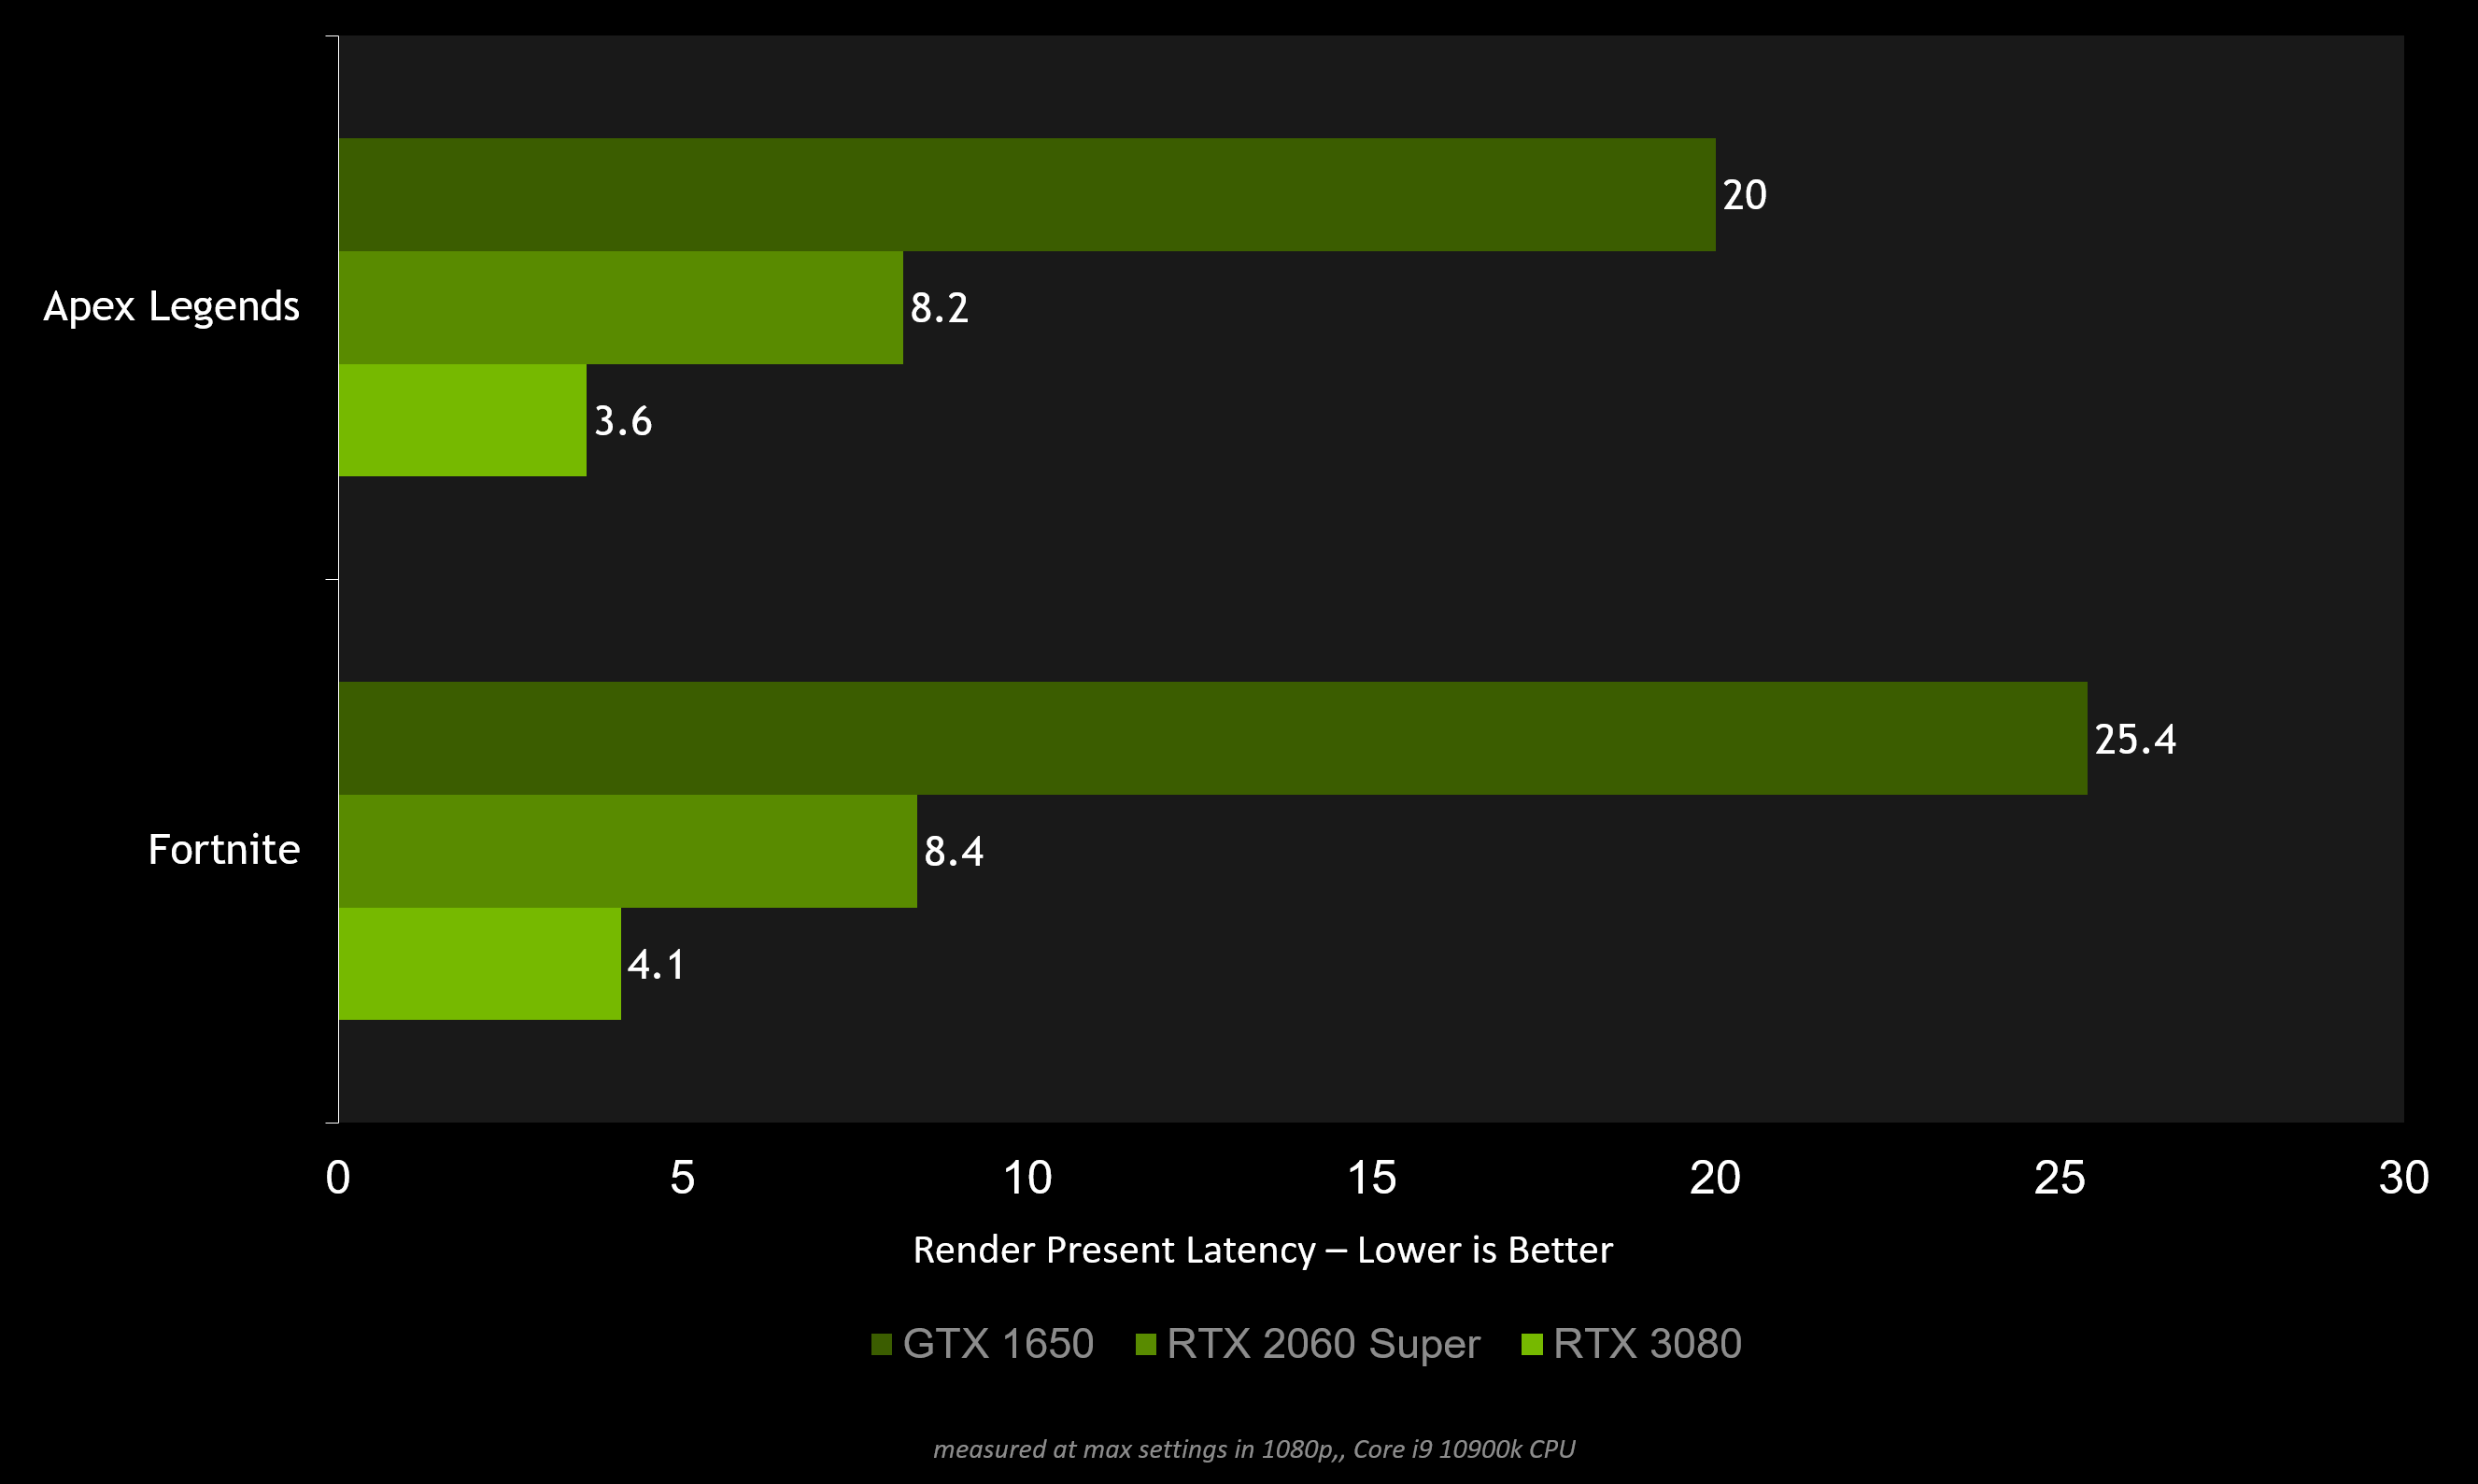 How To Reduce Lag A Guide To Better System Latency Geforce News Nvidia